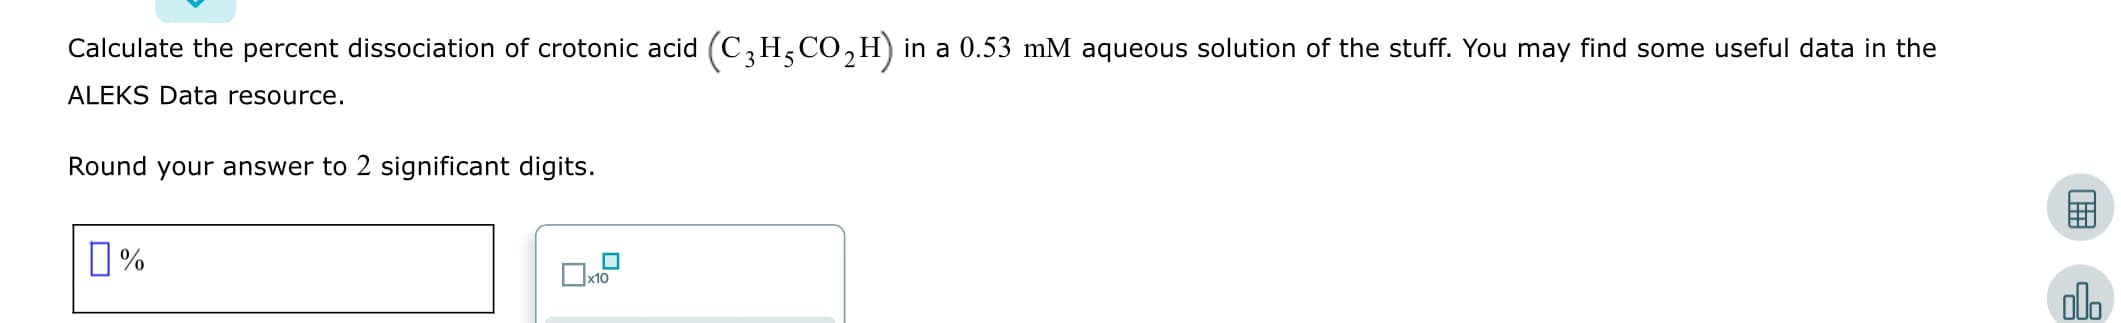 Calculate the percent dissociation of crotonic acid (C, H,CO,H) in a 0.53 mM aqueous solution of the stuff. You may find some useful data in the
ALEKS Data resource.
Round your answer to 2 significant digits.
O%
Dx10
ol.
